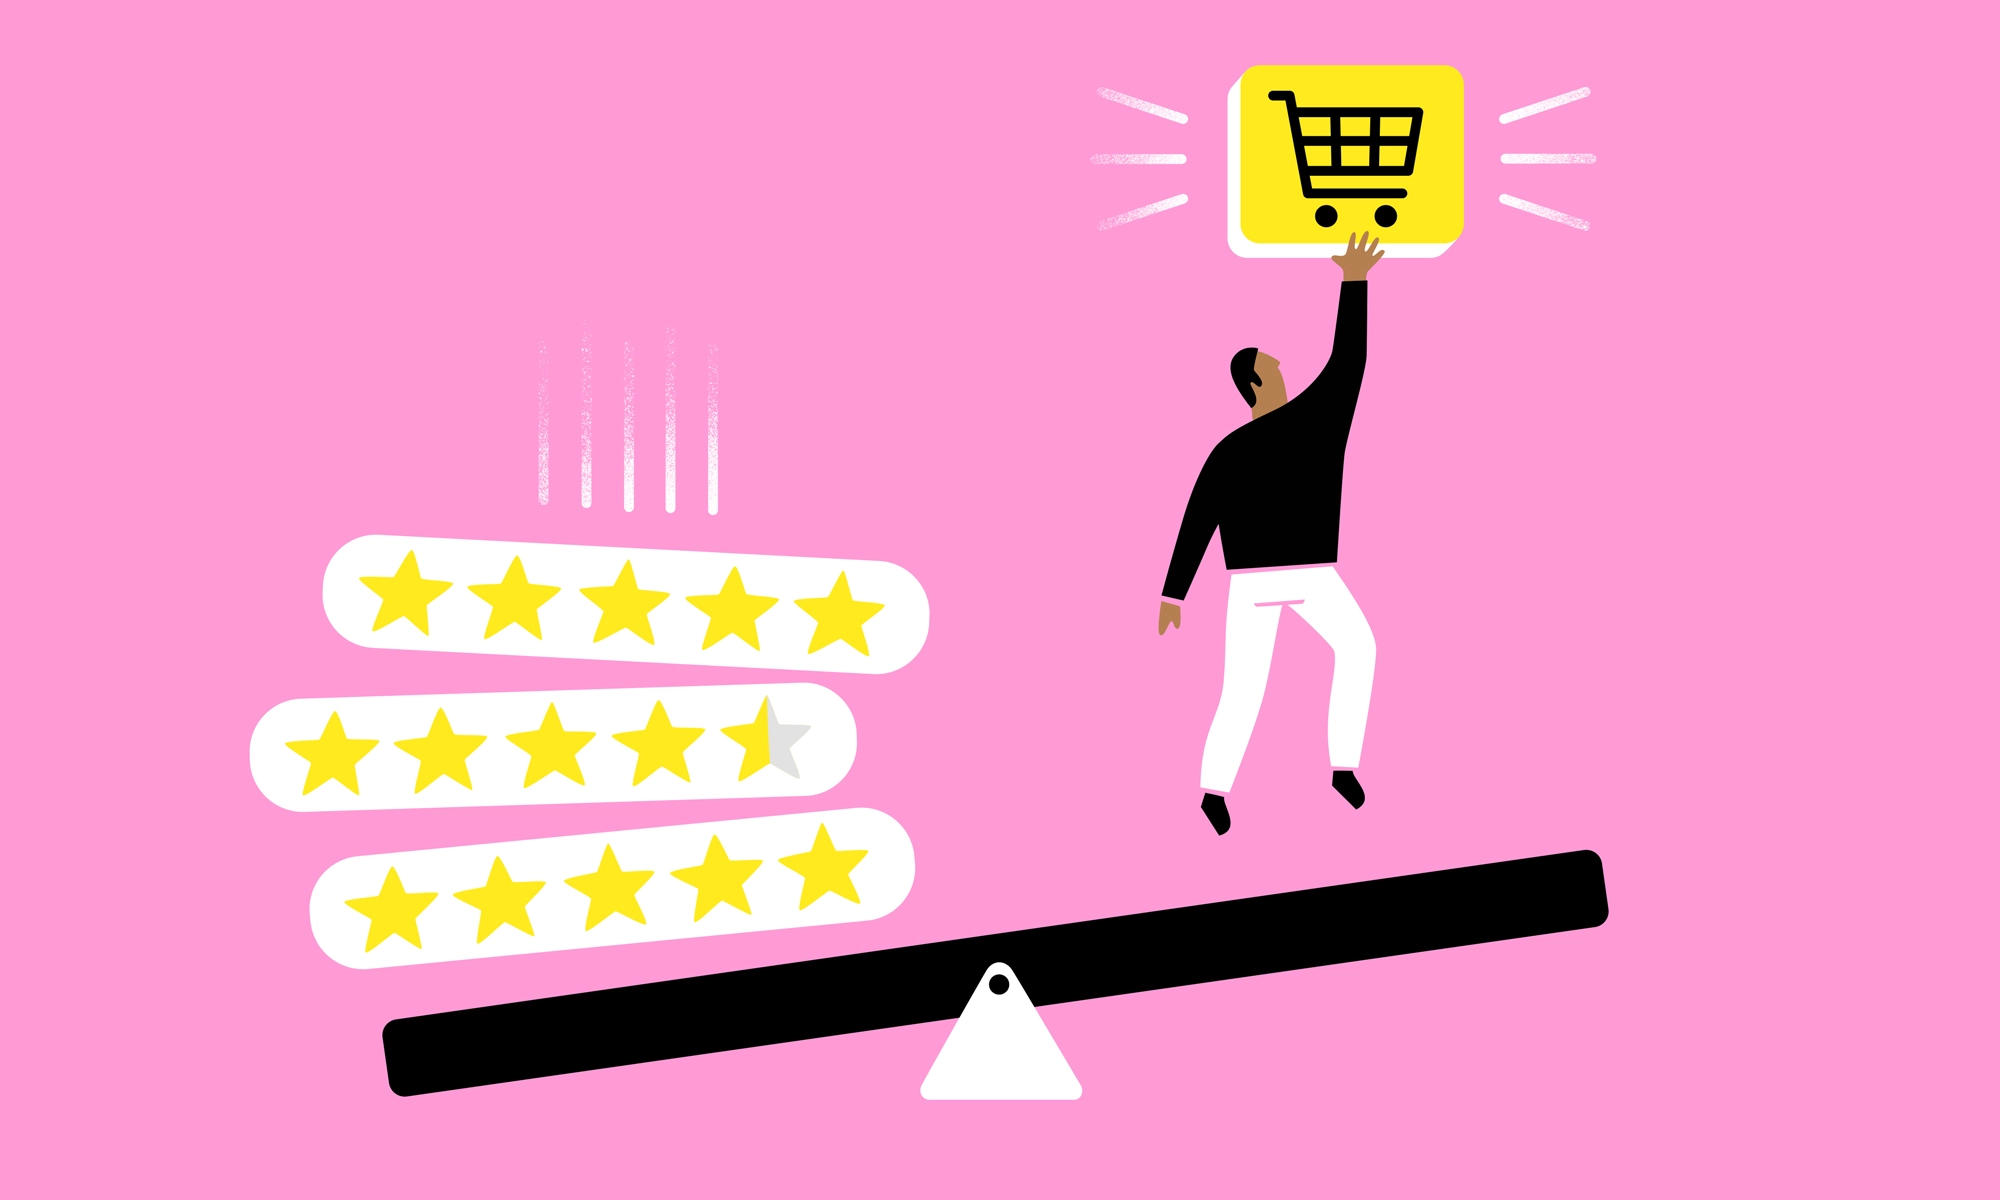 Businesses may be tempted to purchase Google reviews as a way to boost their reputation. This is especially true for businesses that are new to the market or have a low star rating. Positive reviews can be enticing for potential customers, and businesses may think that buying reviews is the easiest way to achieve that.